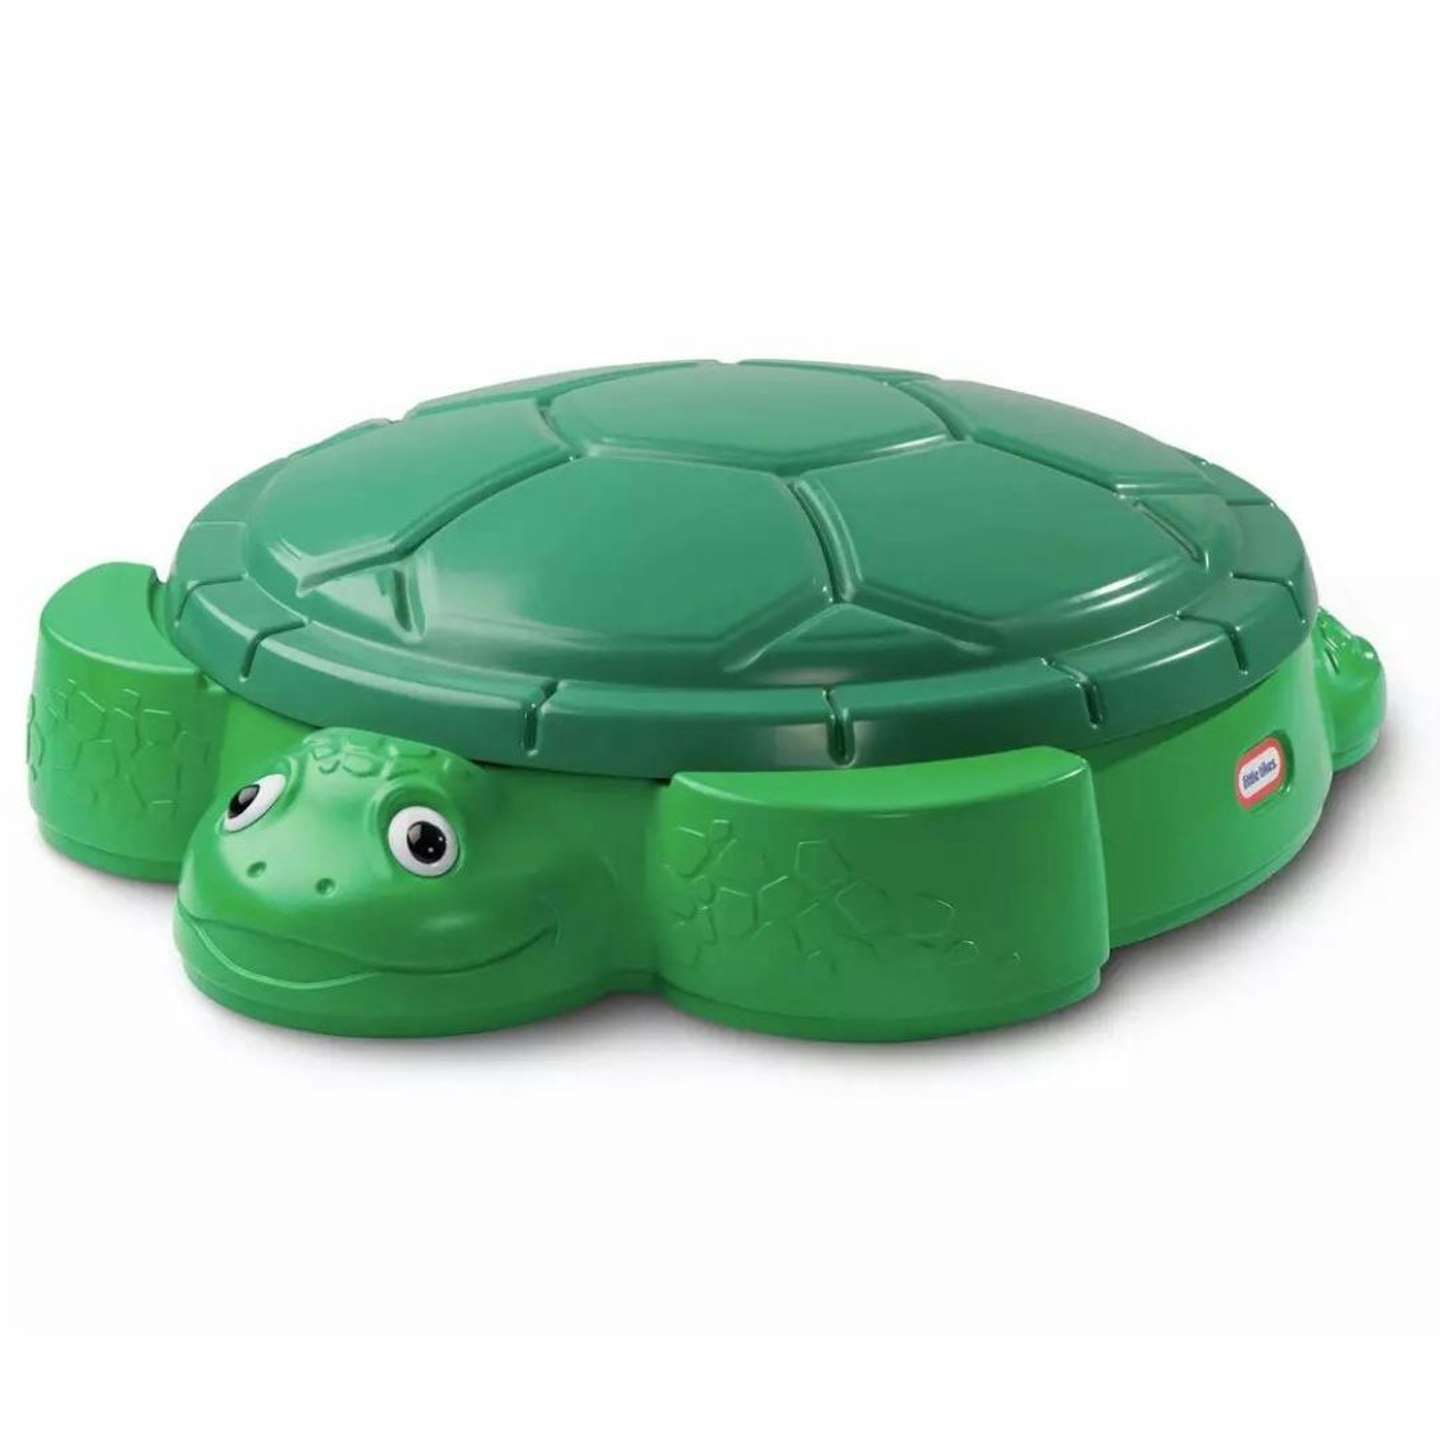 The Best Toys For One-Year-Olds: Little Tikes Turtle Sand Pit with Cover 